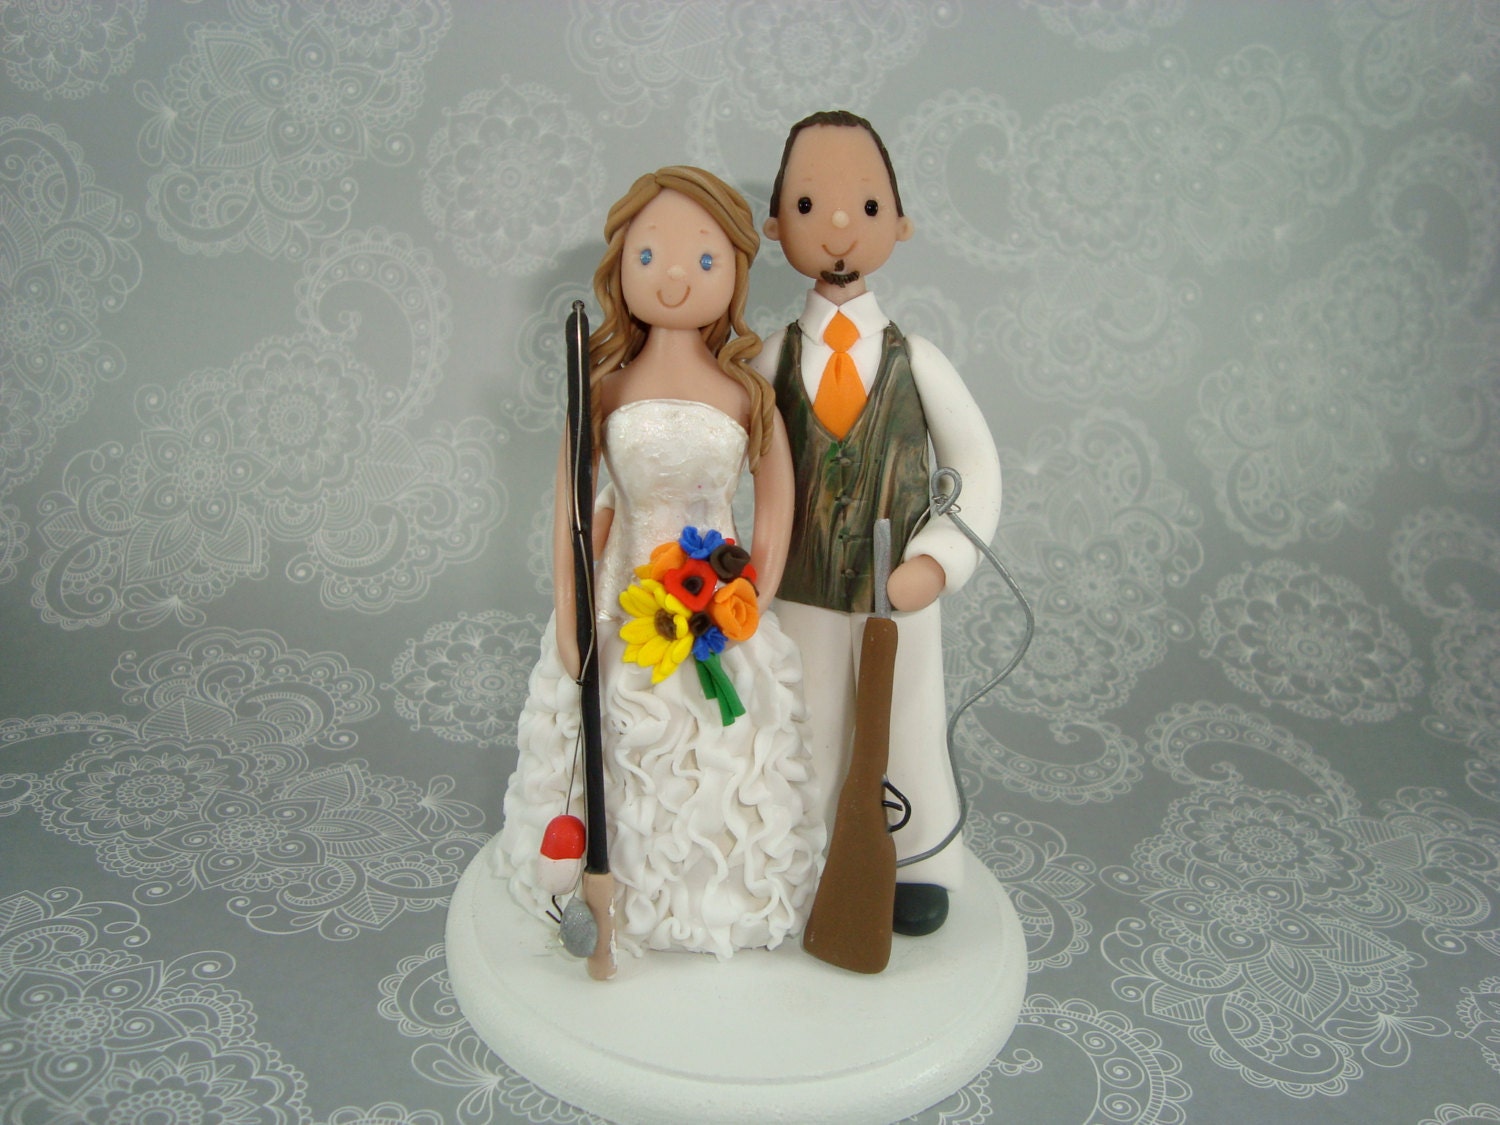 Wedding Reception Party Camo Military Hunter Hunting Bride w/ Veil Cake Topper 